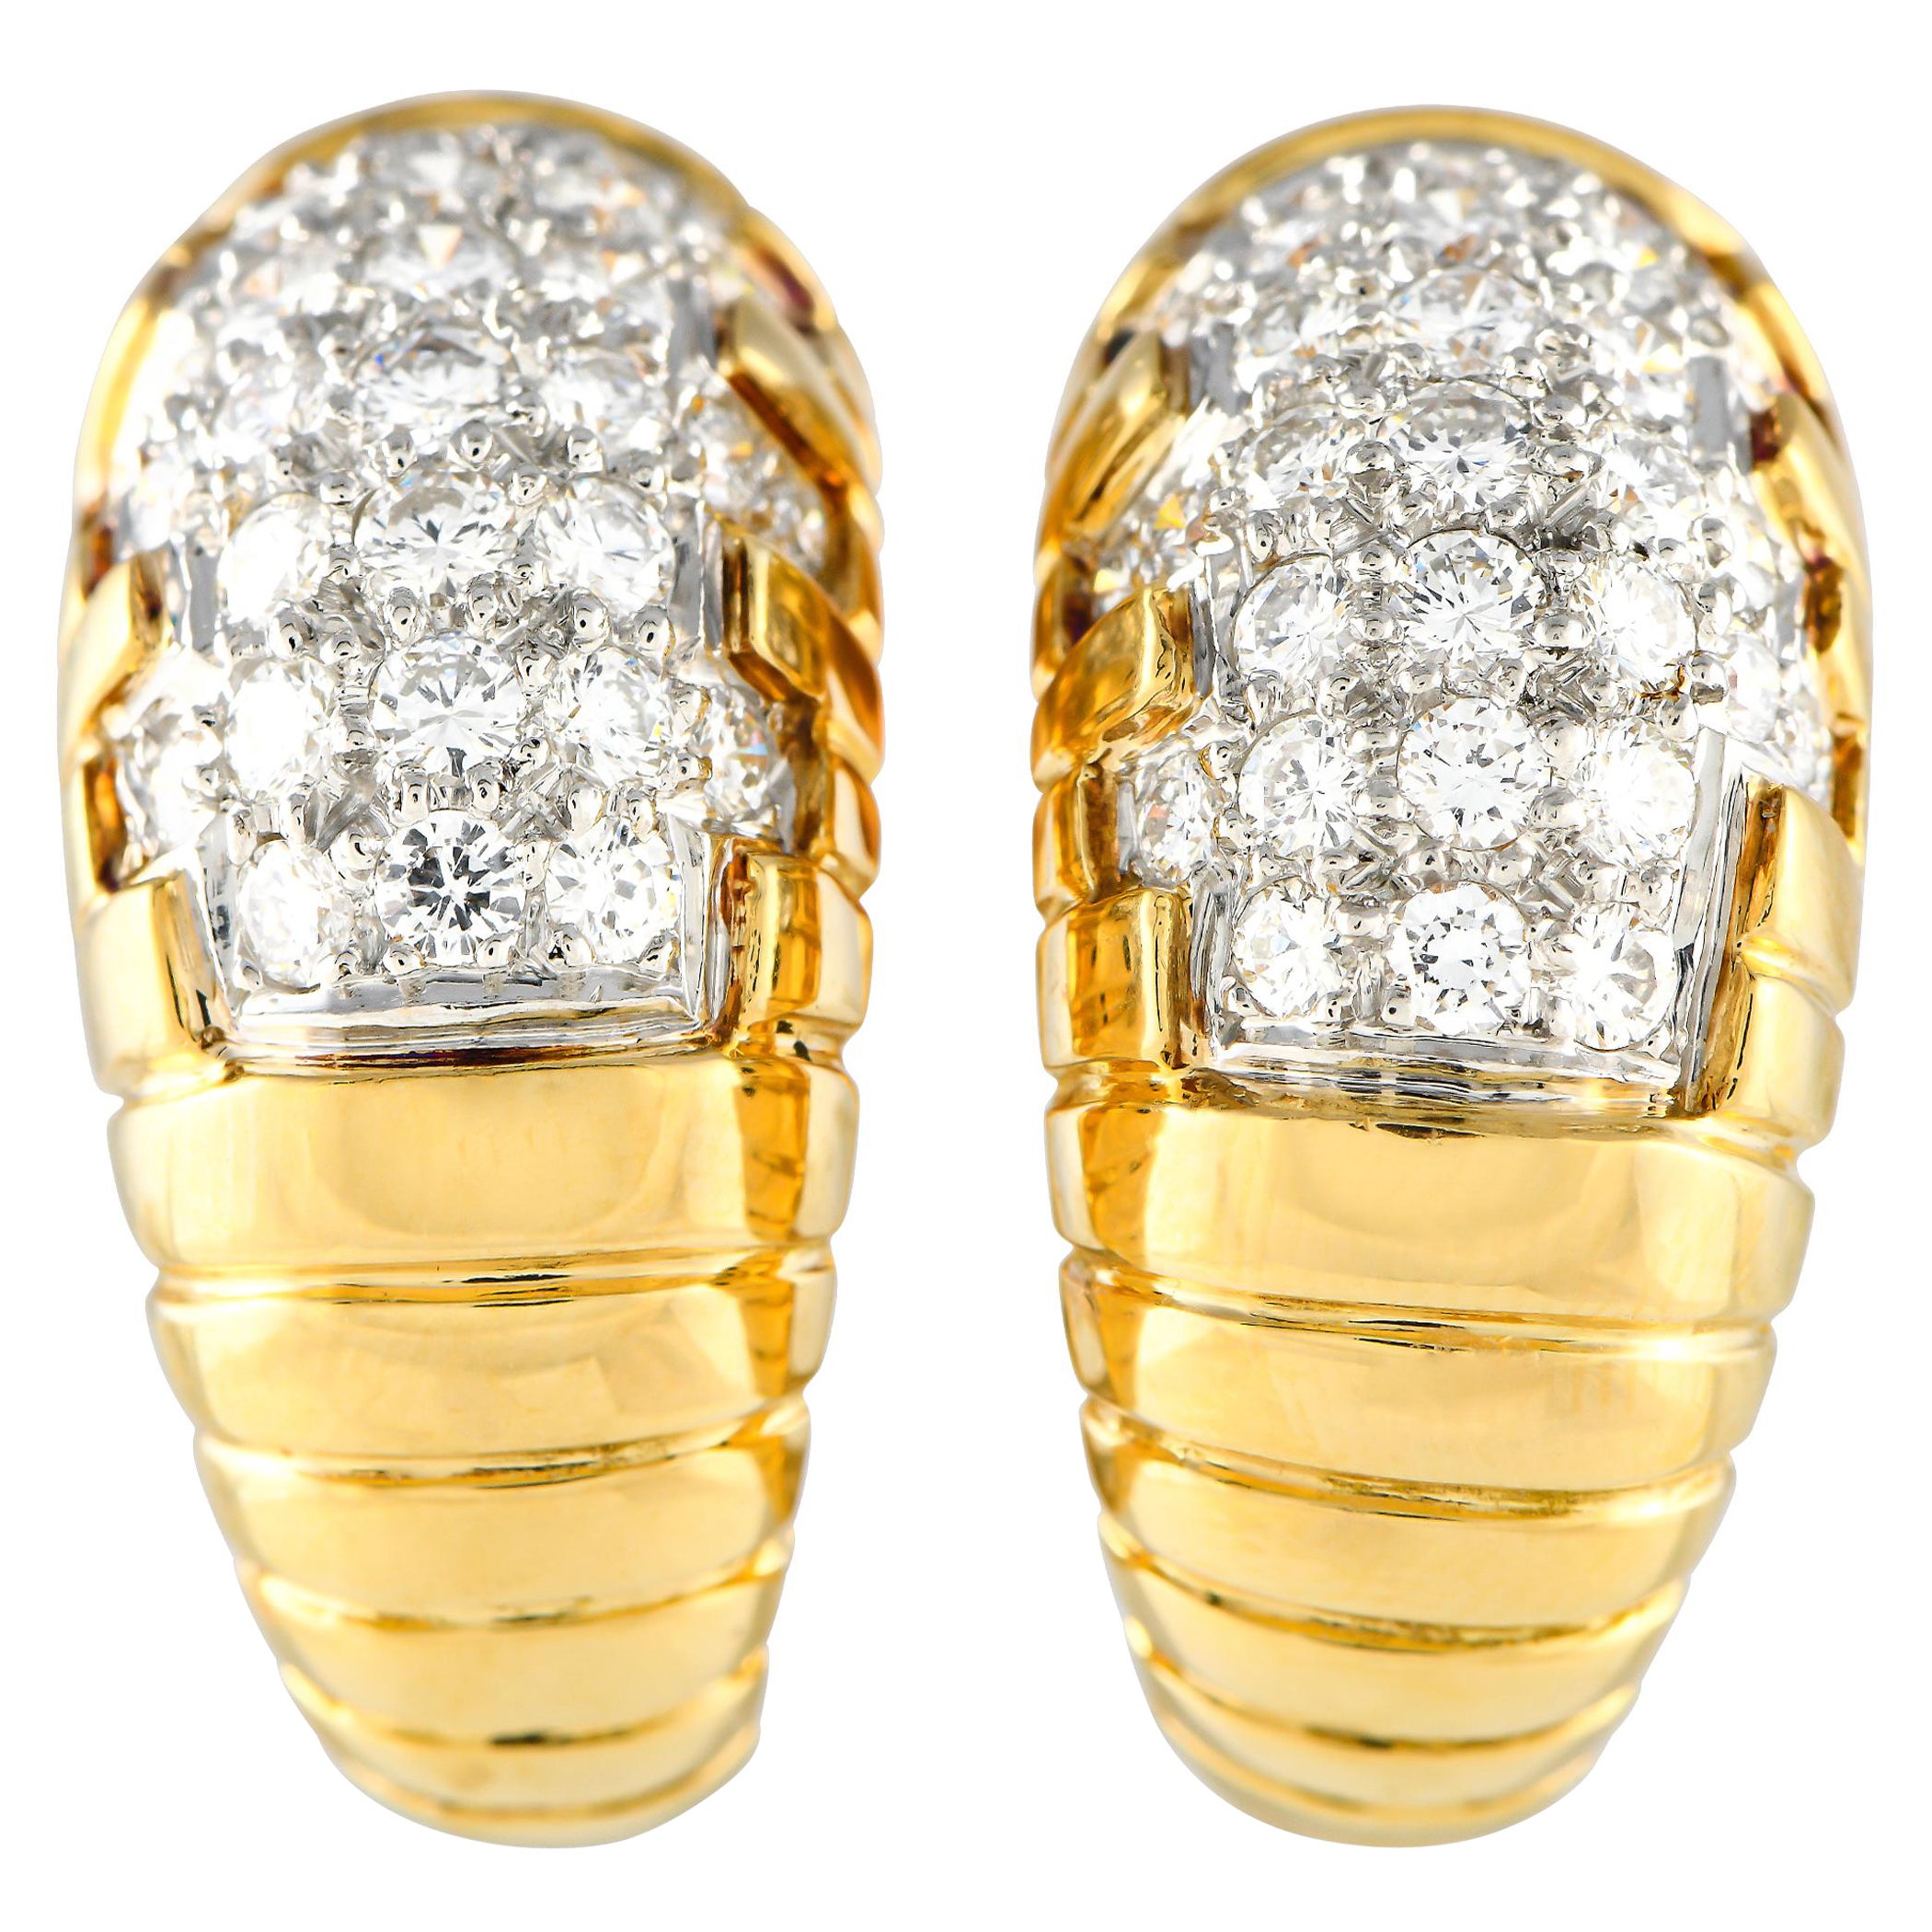 LB Exclusive 18K Yellow Gold 1.35ct Diamond Clip-On Earrings